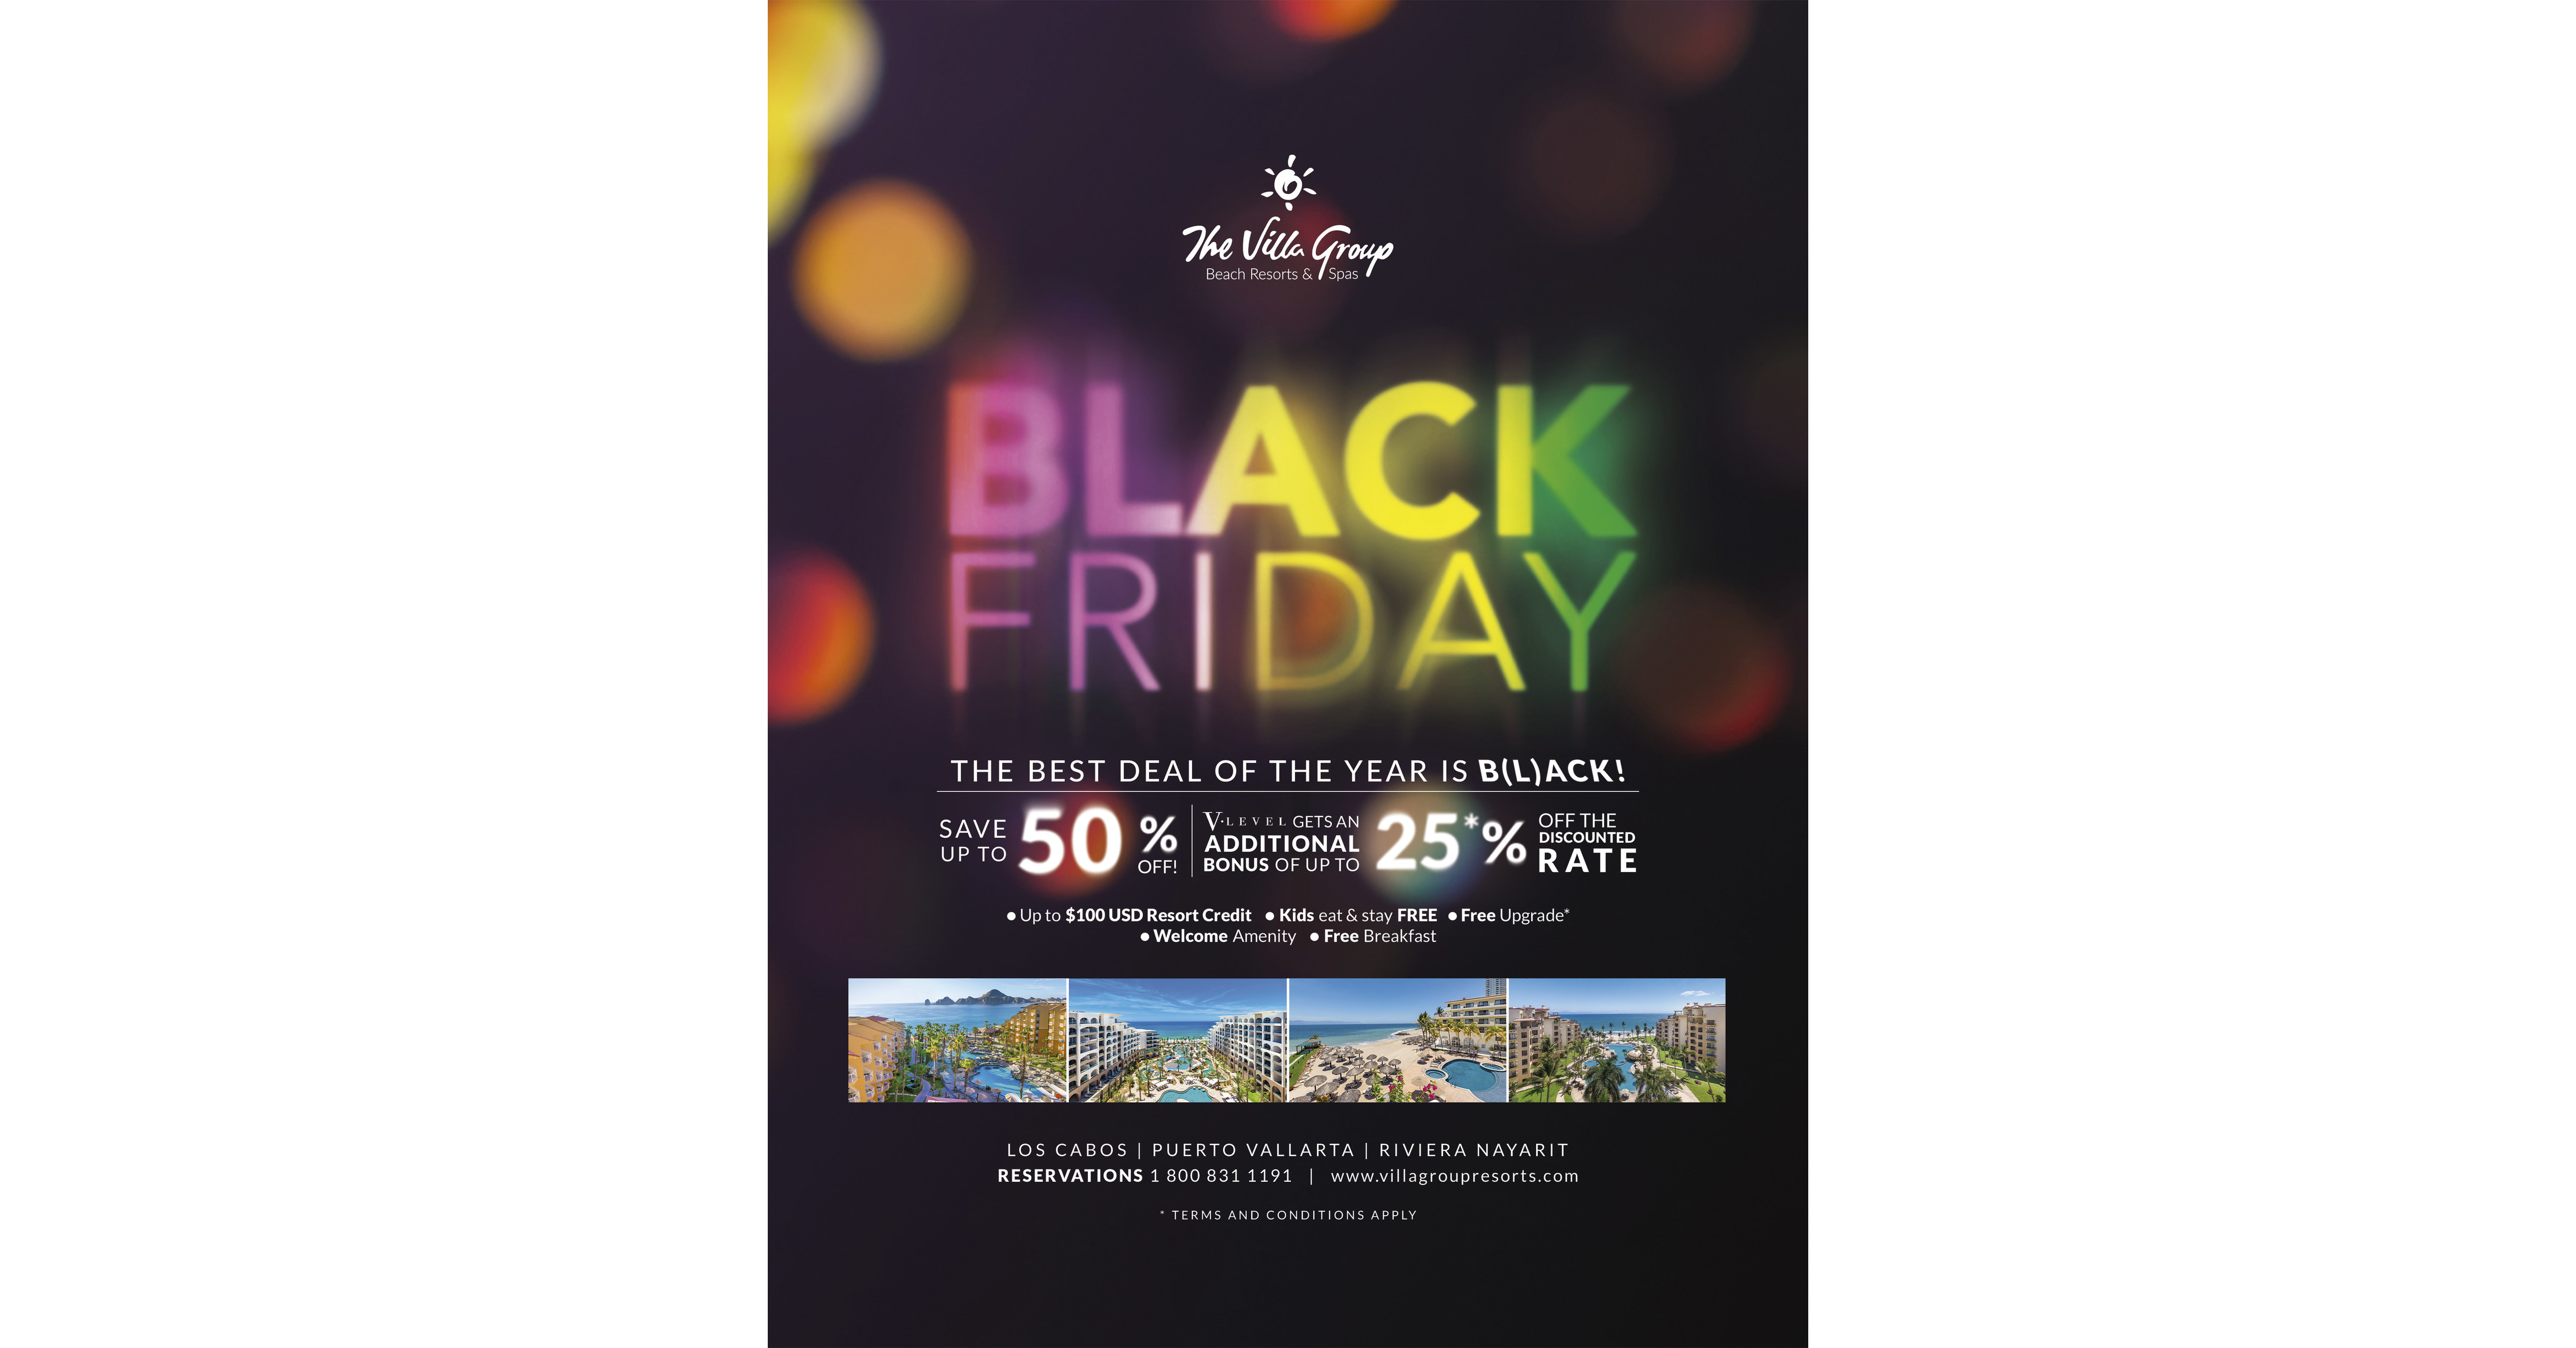 The Villa Group Beach Resorts & Spas Celebrate Black Friday Throughout November With Discounts on Luxury Vacations